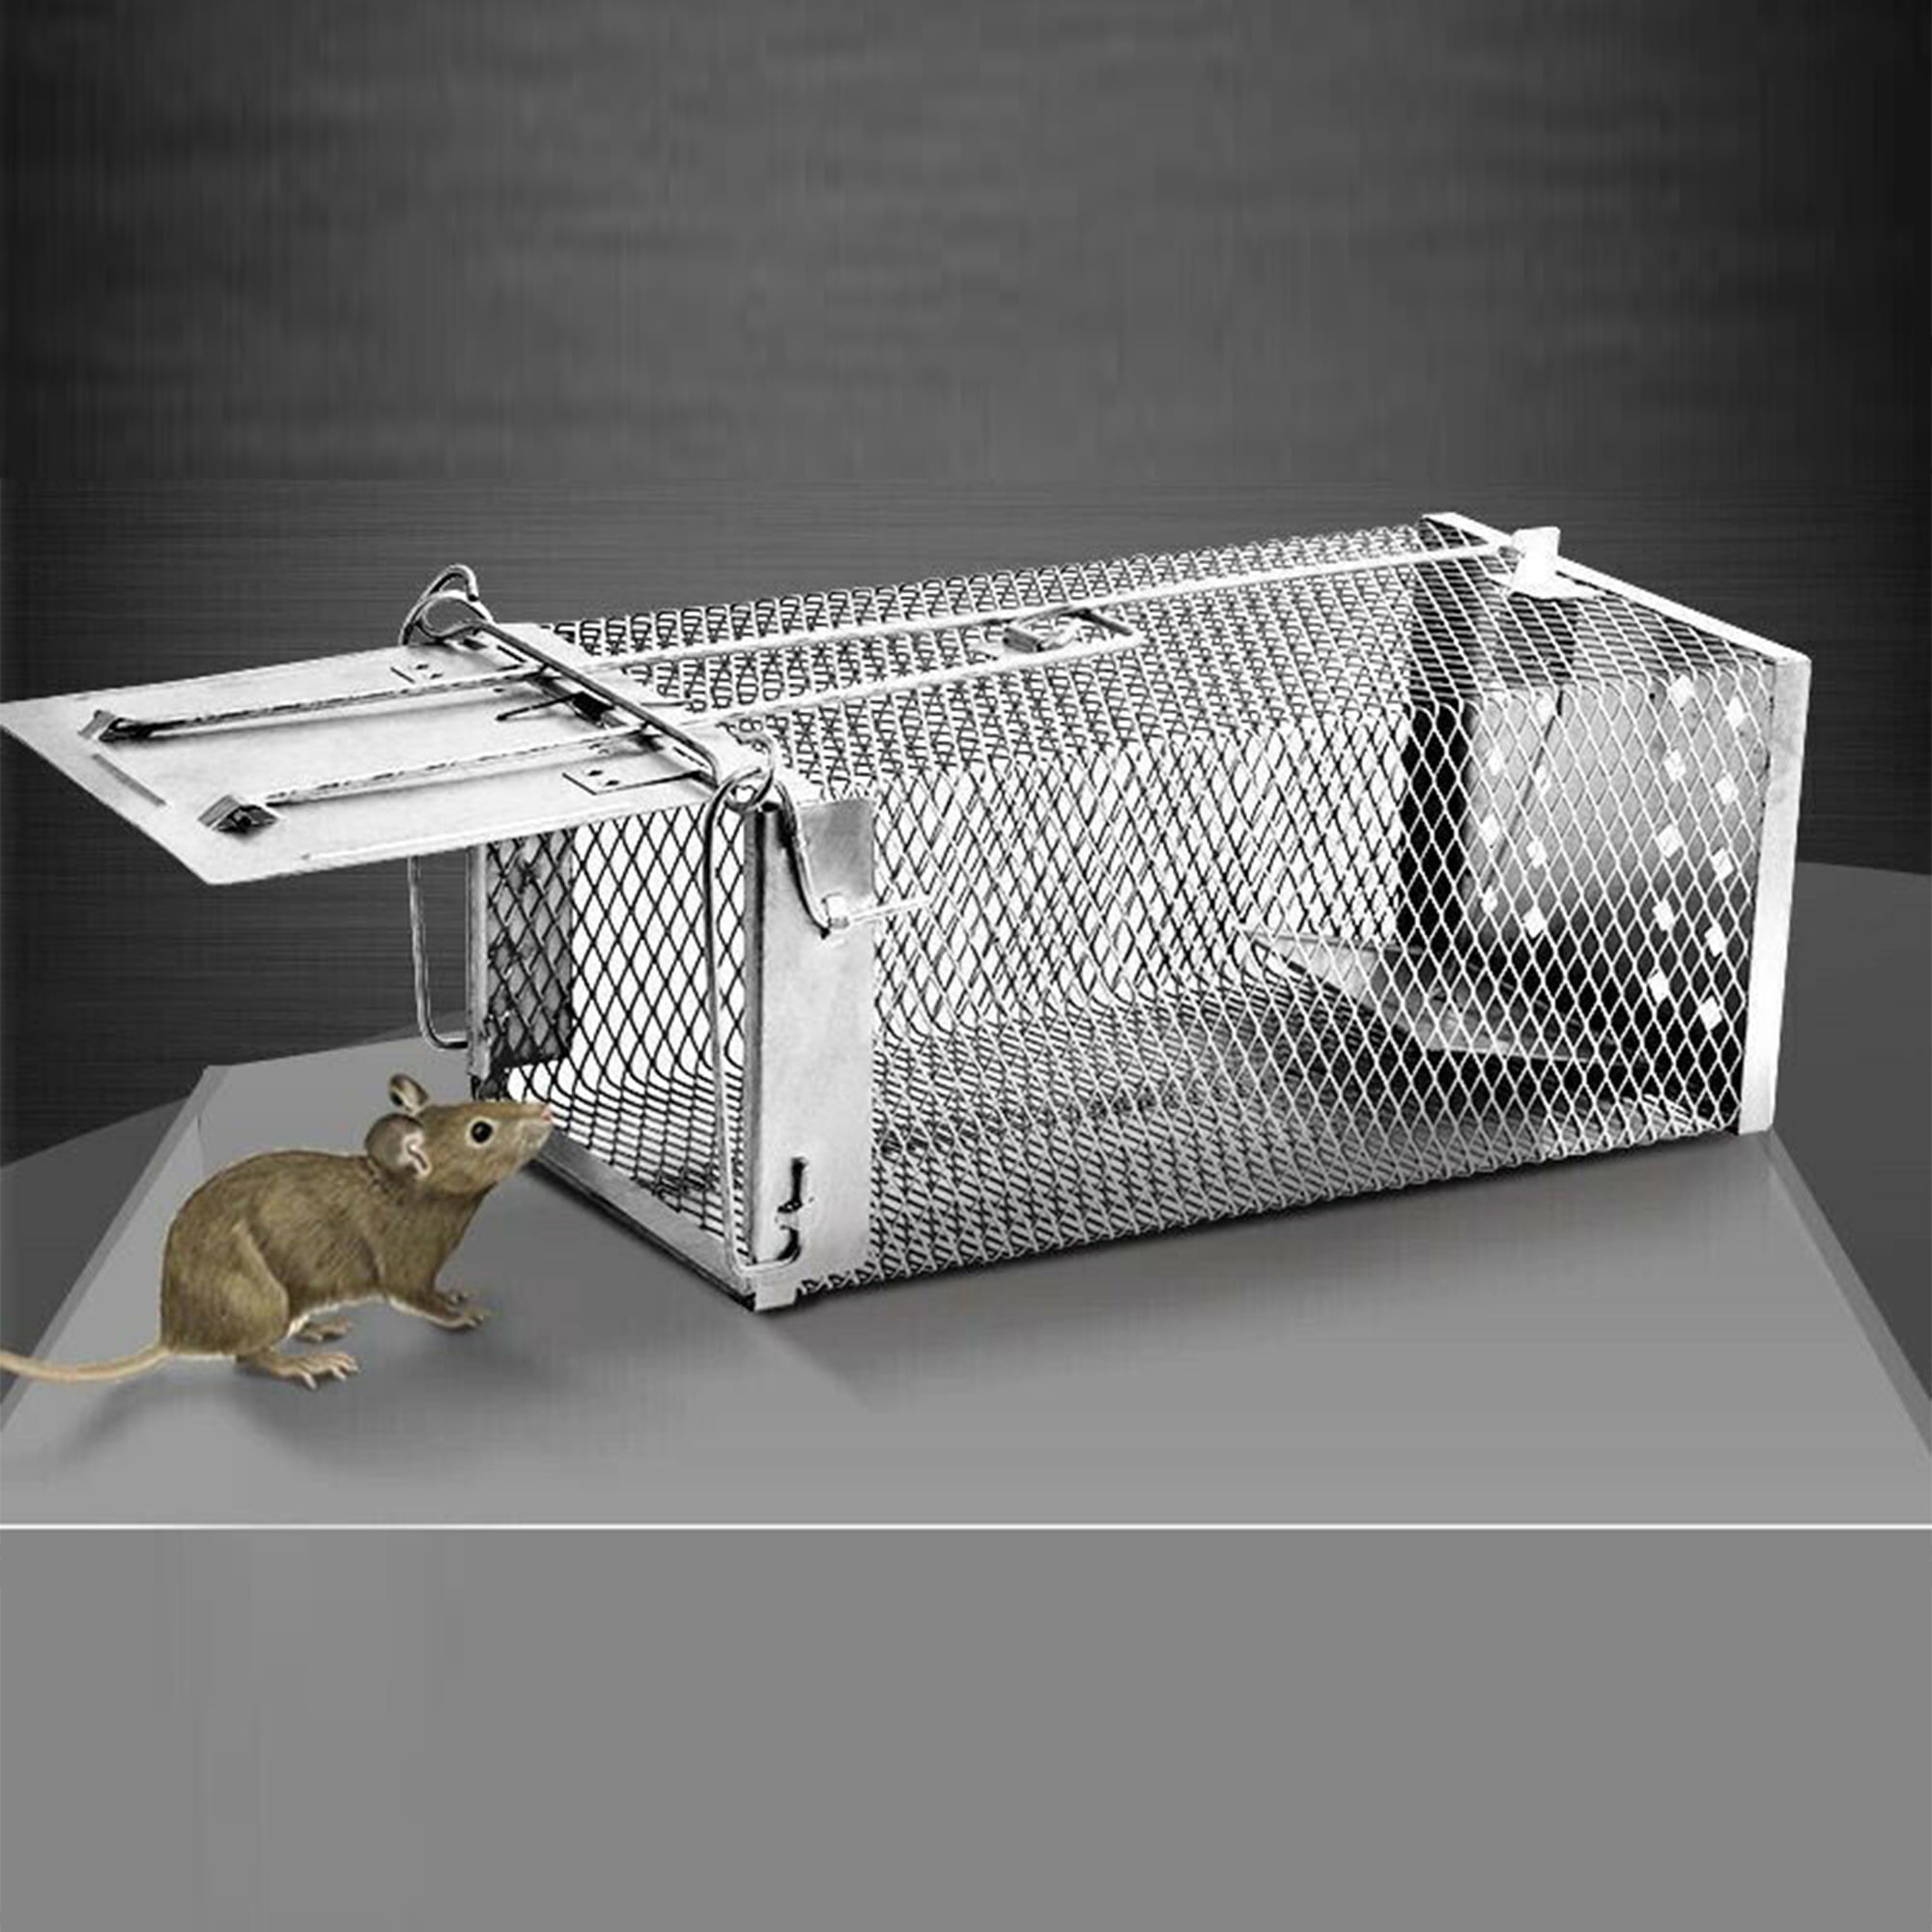 Electric Rat Trap Reusable Mouse Trap Rat Traps Humane Pest Control Traps  Kill Rodent Zapper Work for Mice Chipmunks Squirrels Outdoor Indoor Home